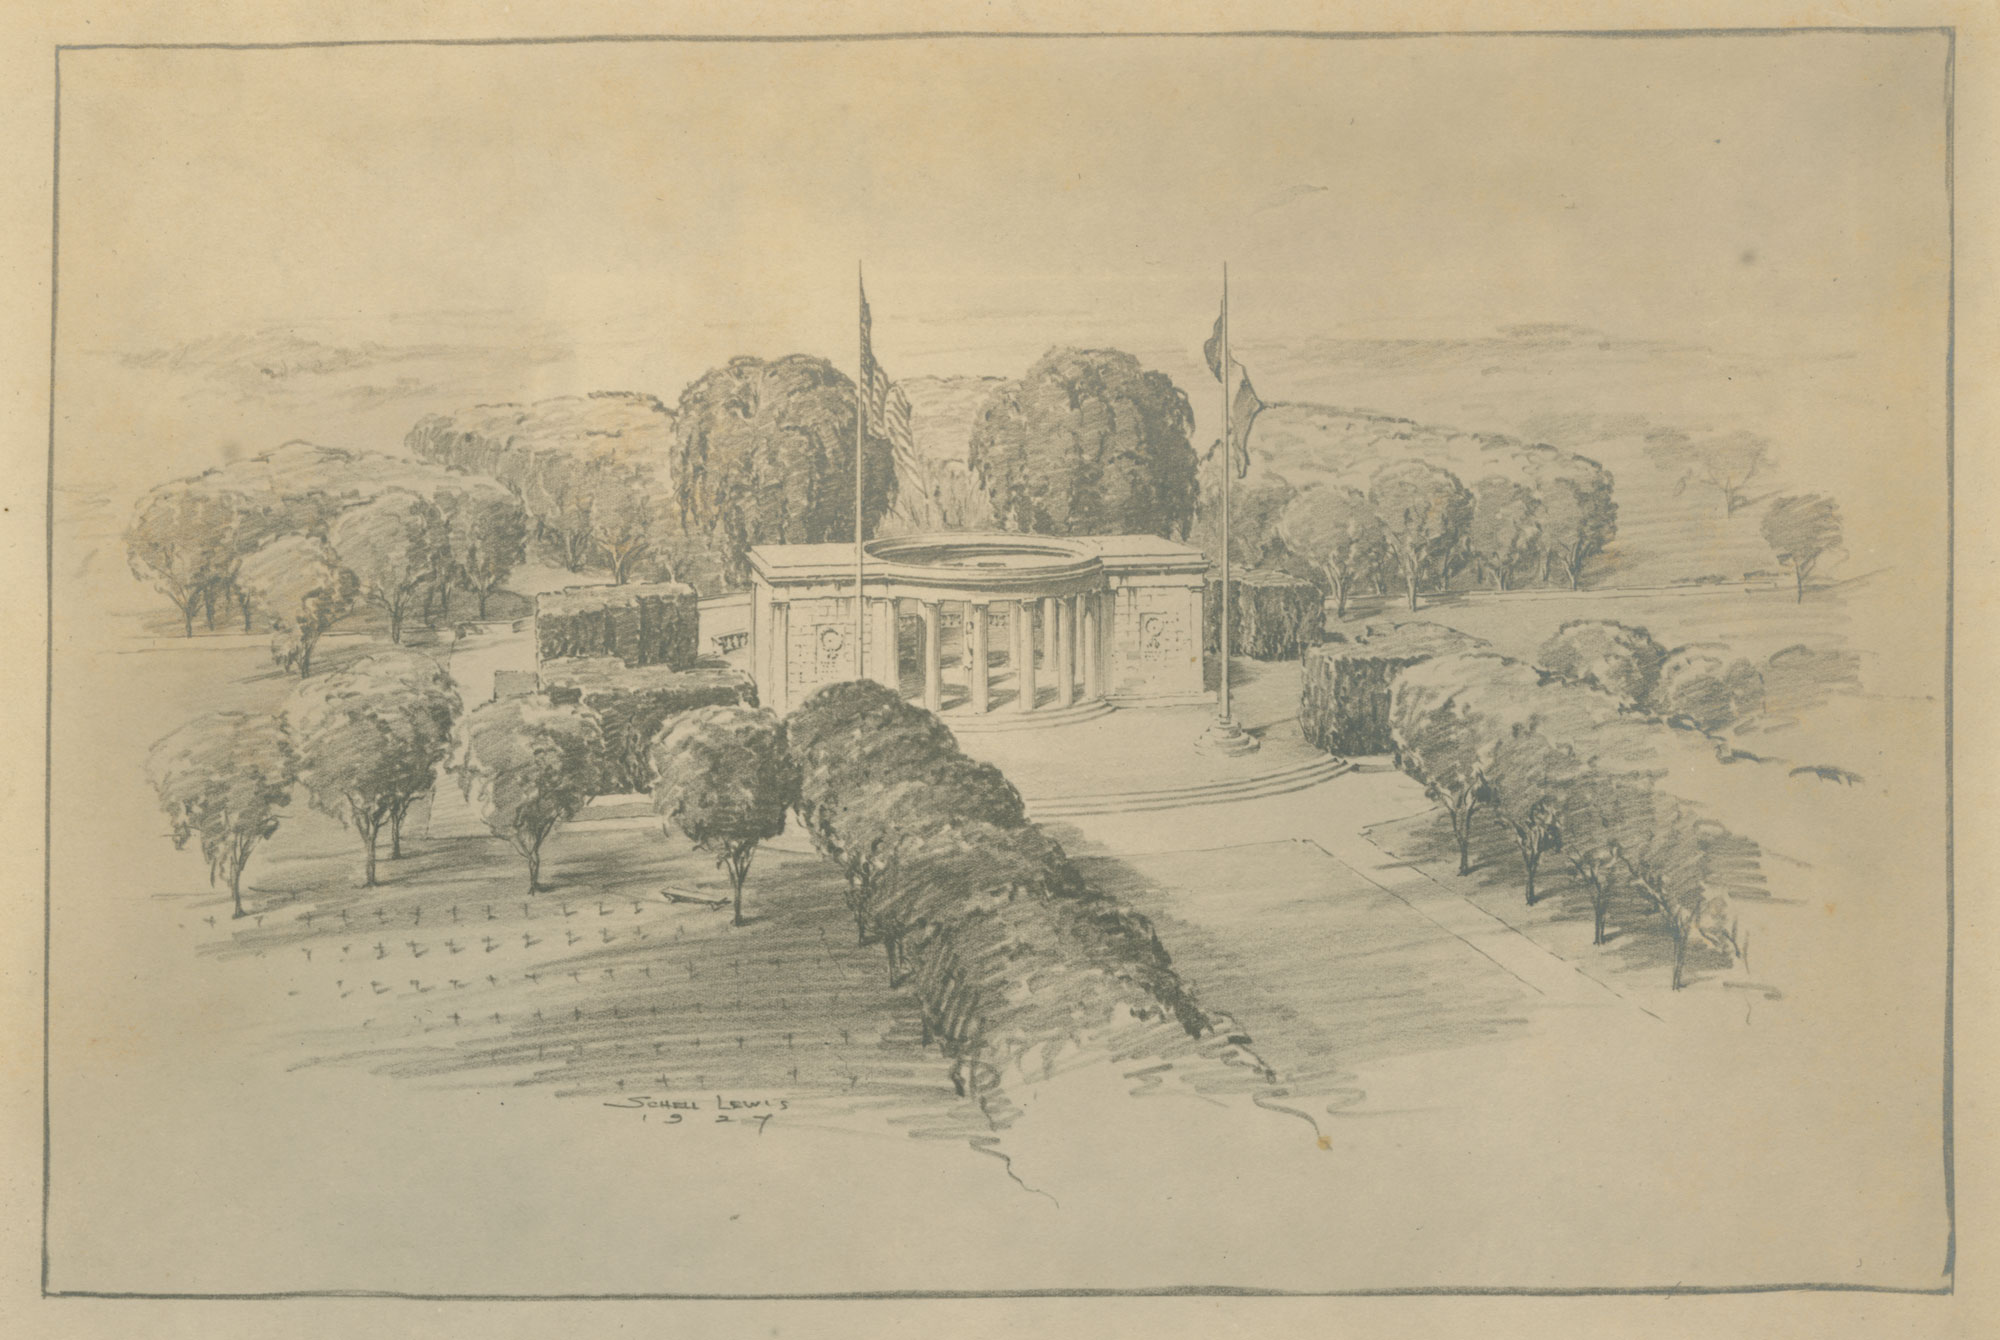 Architectural pencil sketch showing american monument